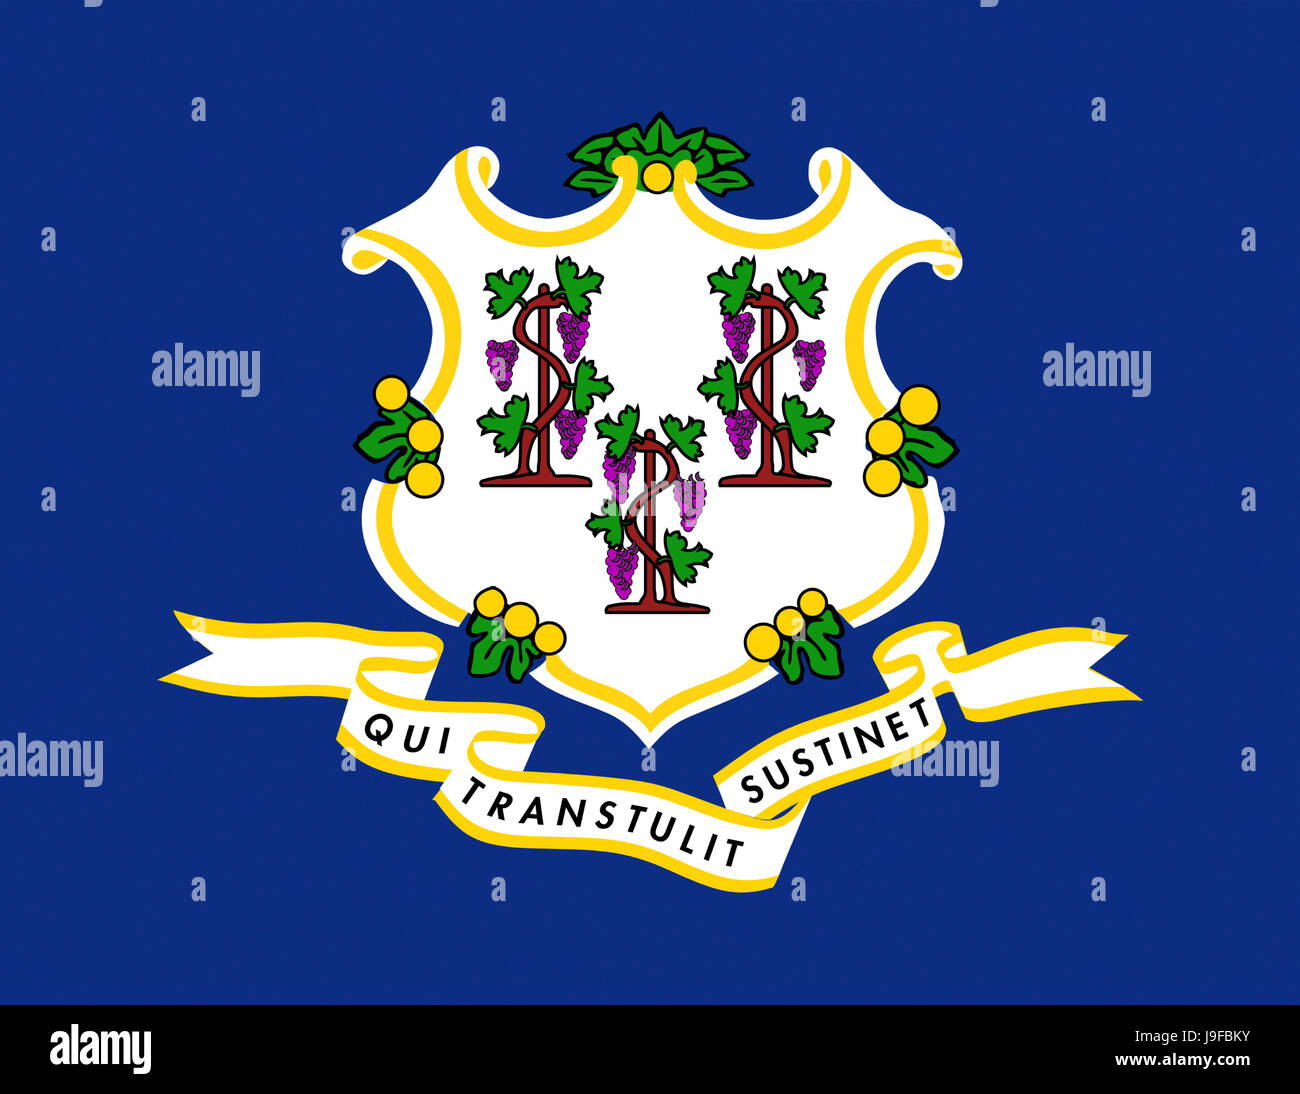 Illustration of the flag of Connecticut state in America Stock Photo